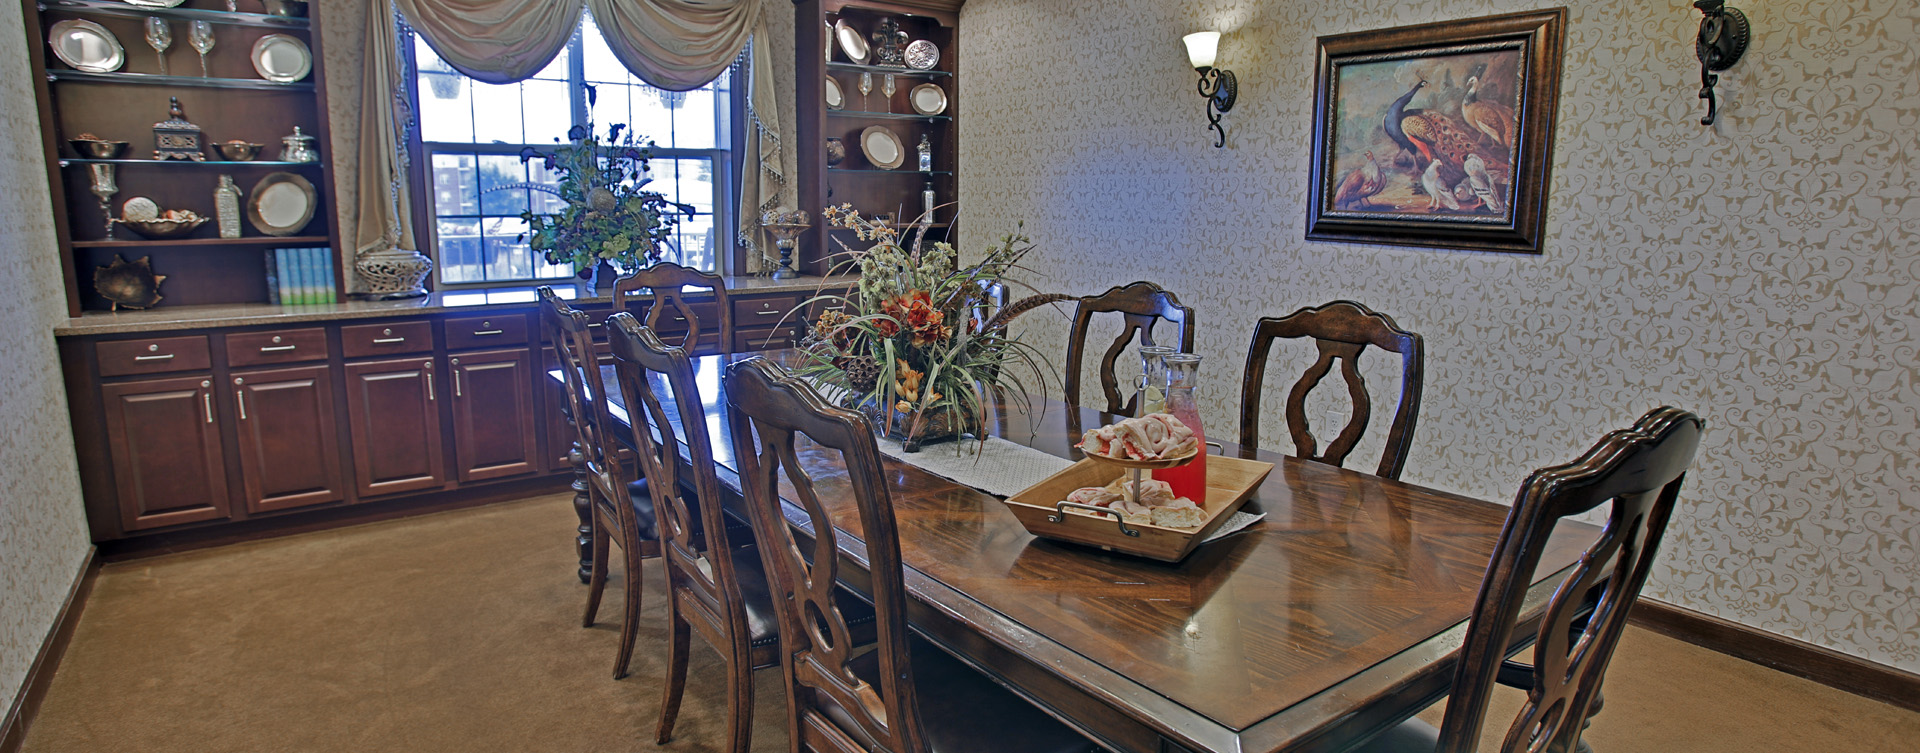 Food is best when shared with family and friends in the private dining room at Bickford of Greenwood